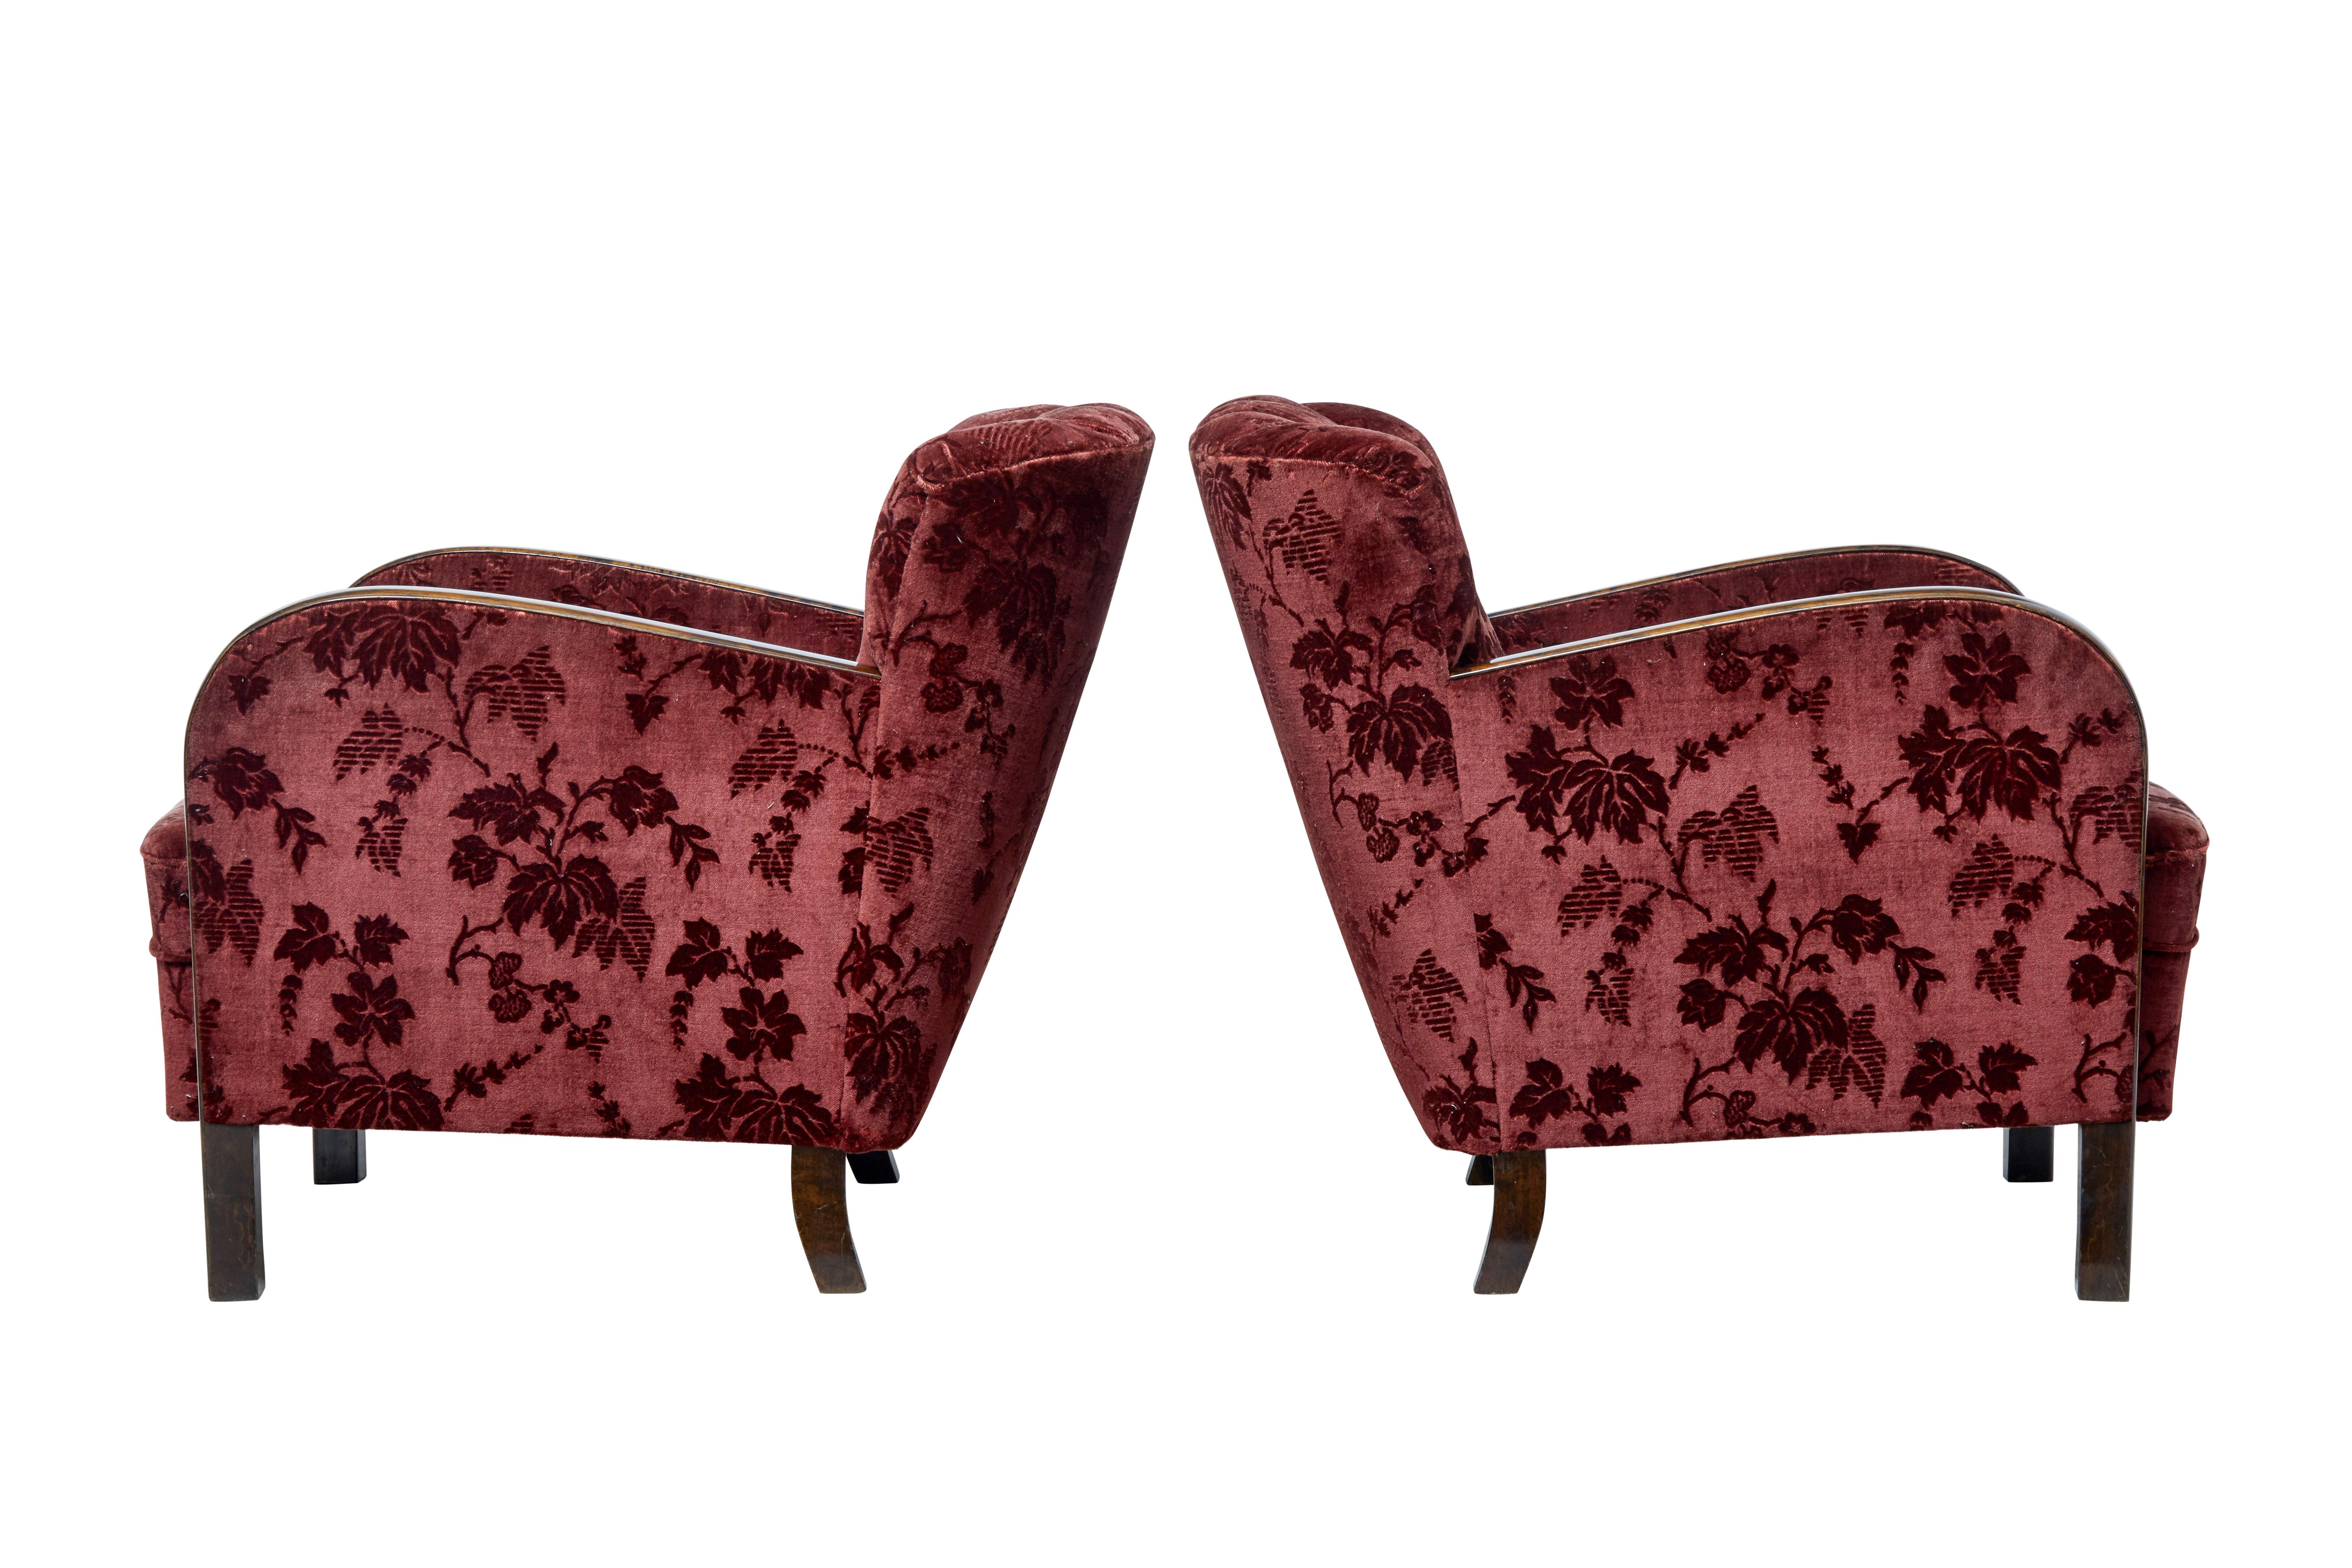 Pair of late Art Deco period armchairs, circa 1940.

Shaped shell back design, typical continuous flowing arm which is presented in a dark stained birch.

Covered backs which allows these chairs to be free standing.

Original velvet covering